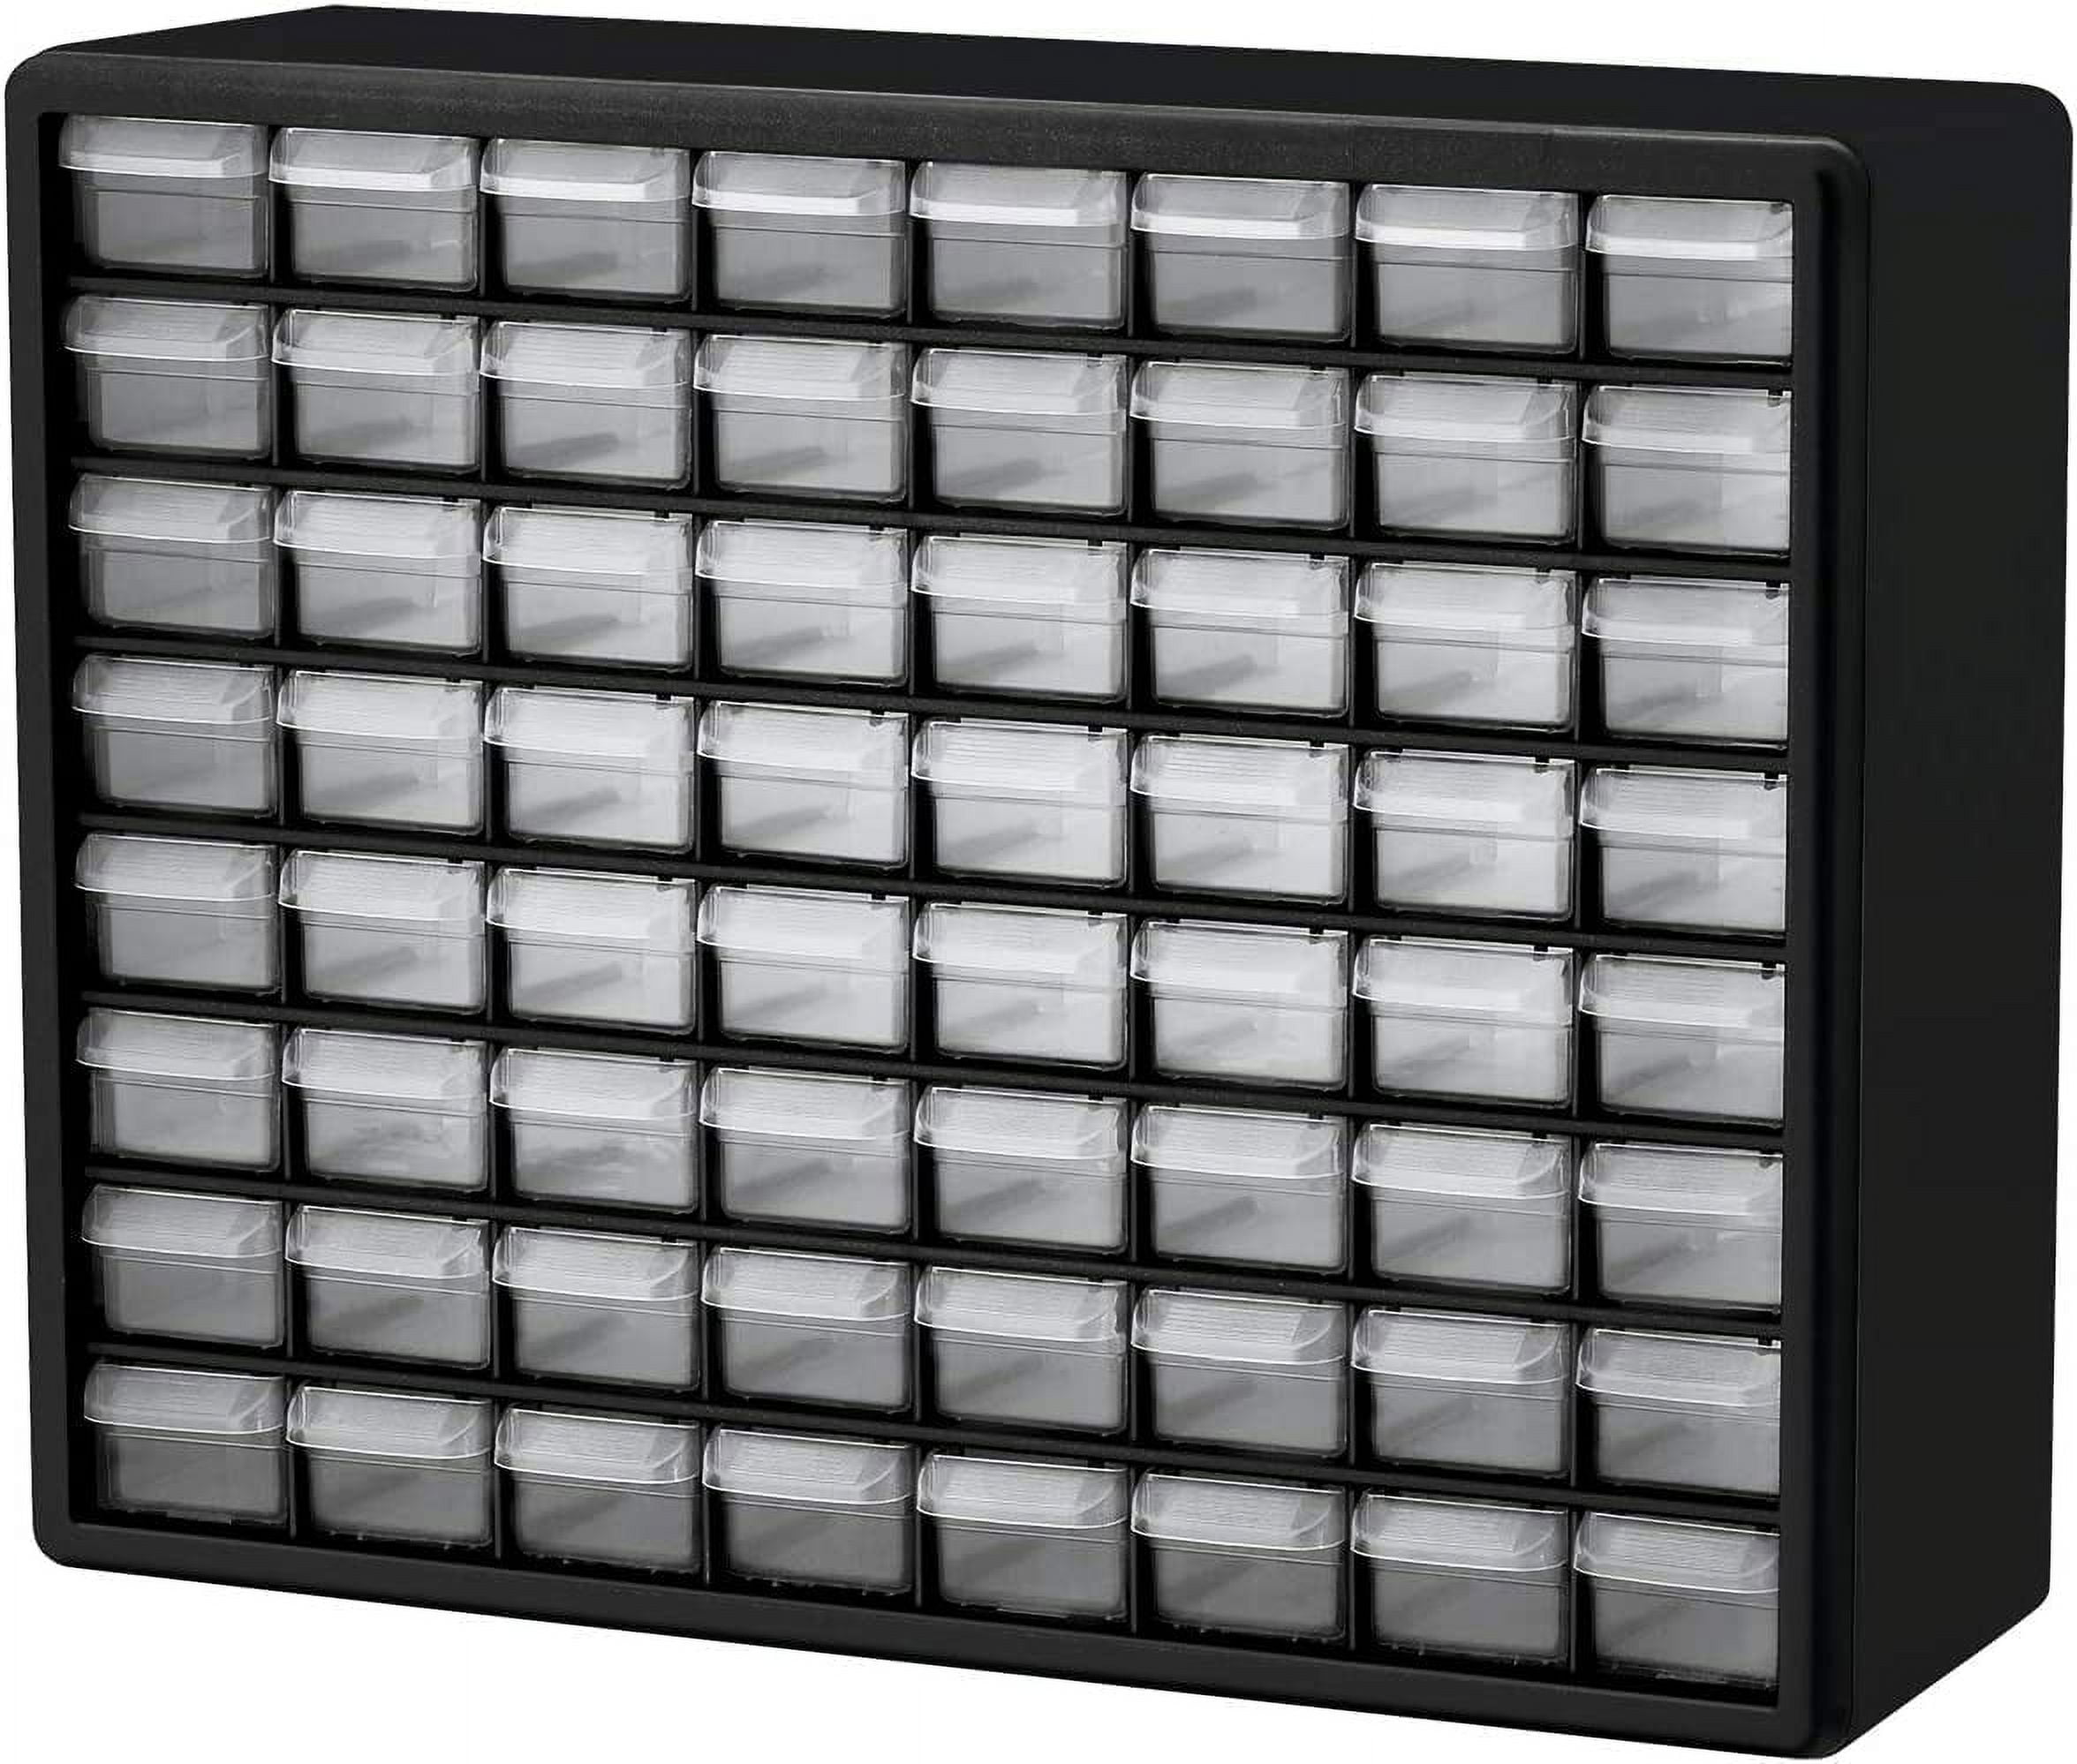 Akro-Mils 64 Drawer Plastic Cabinet Storage Organizer with Drawers for Hardware, Small Parts, Craft Supplies, Black - image 1 of 14